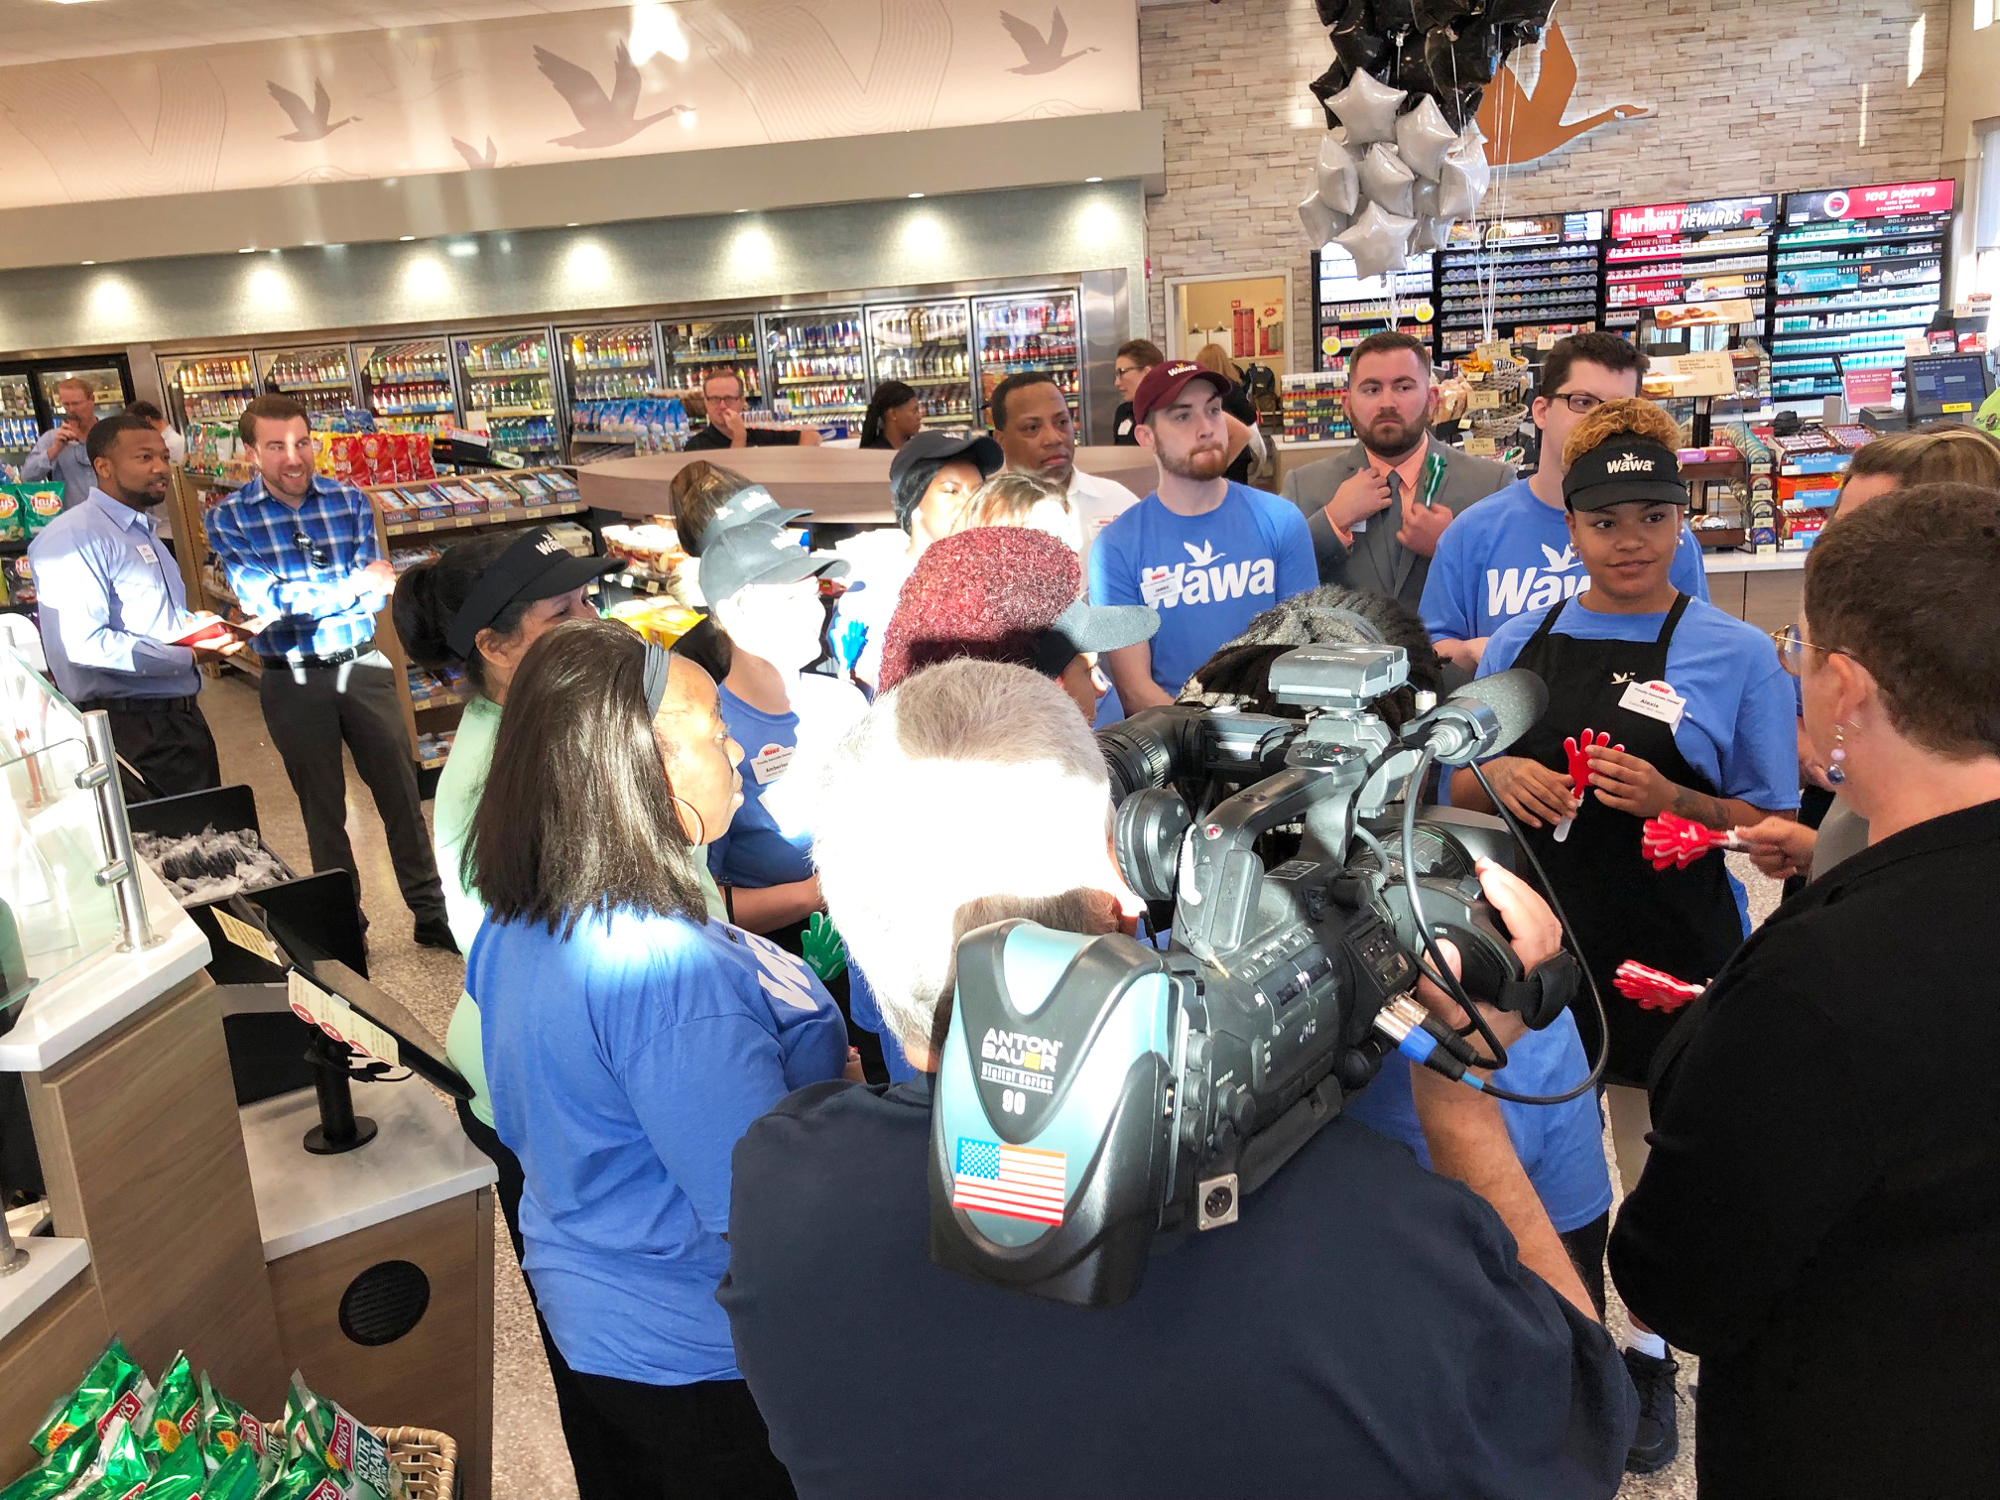 Crowds pack the Wawa grand opening at 2500 Monument Road in East Arlington.